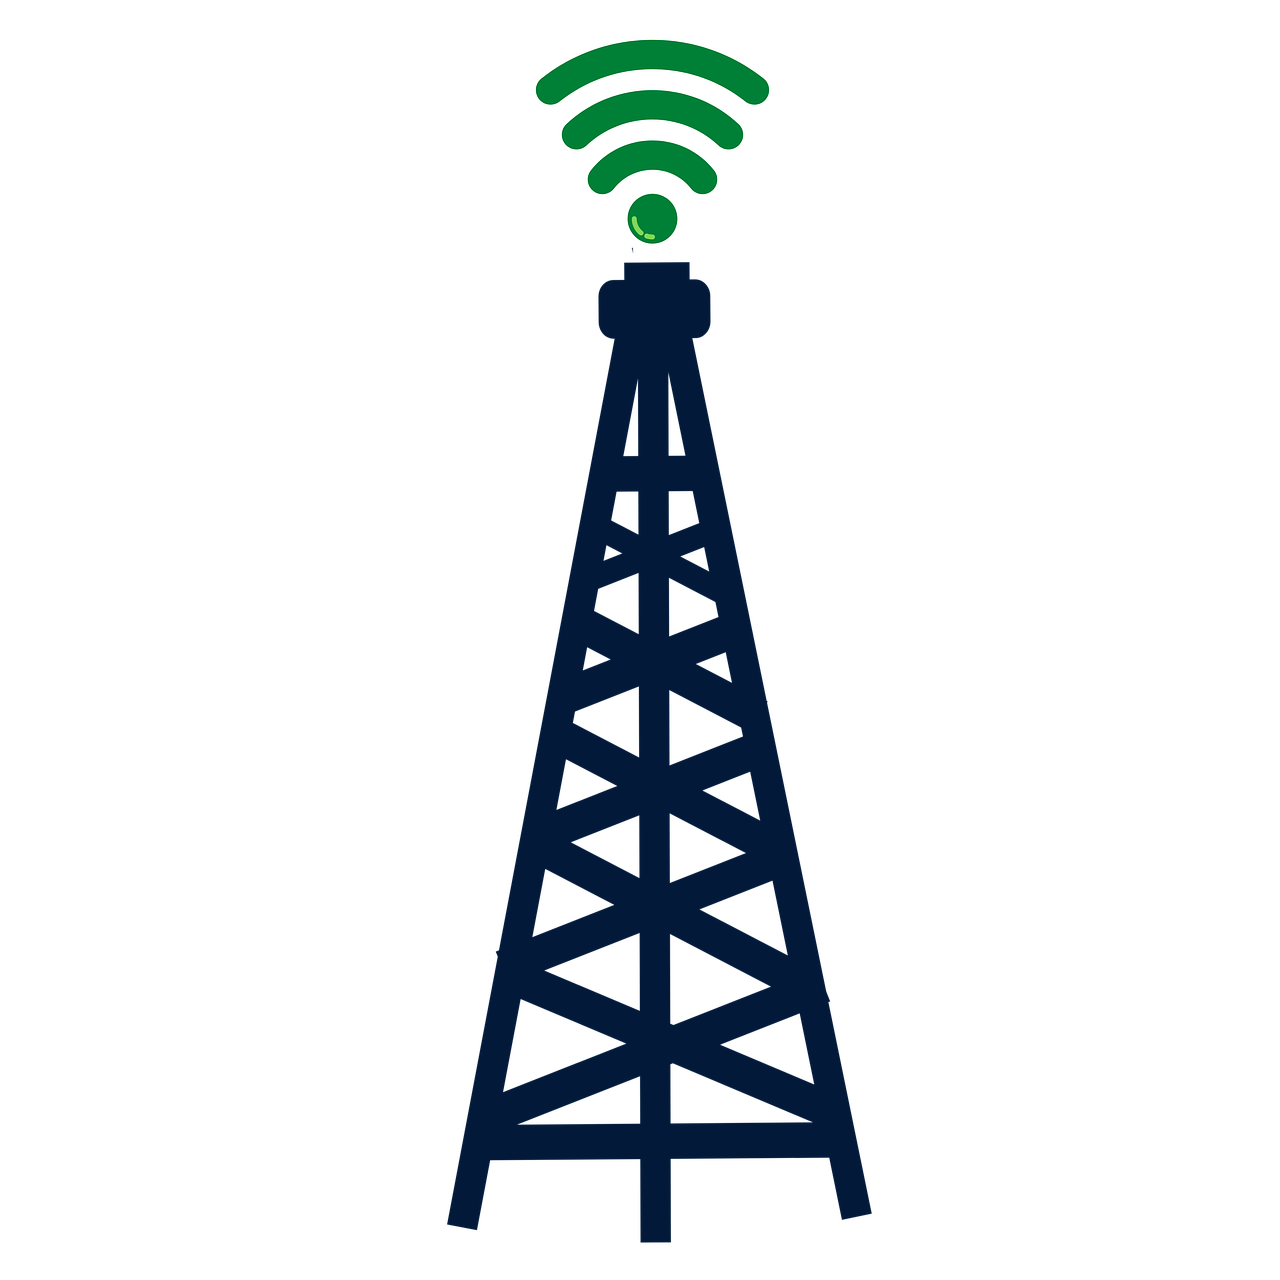 Picture Tower Antenna HQ Image Free PNG Image